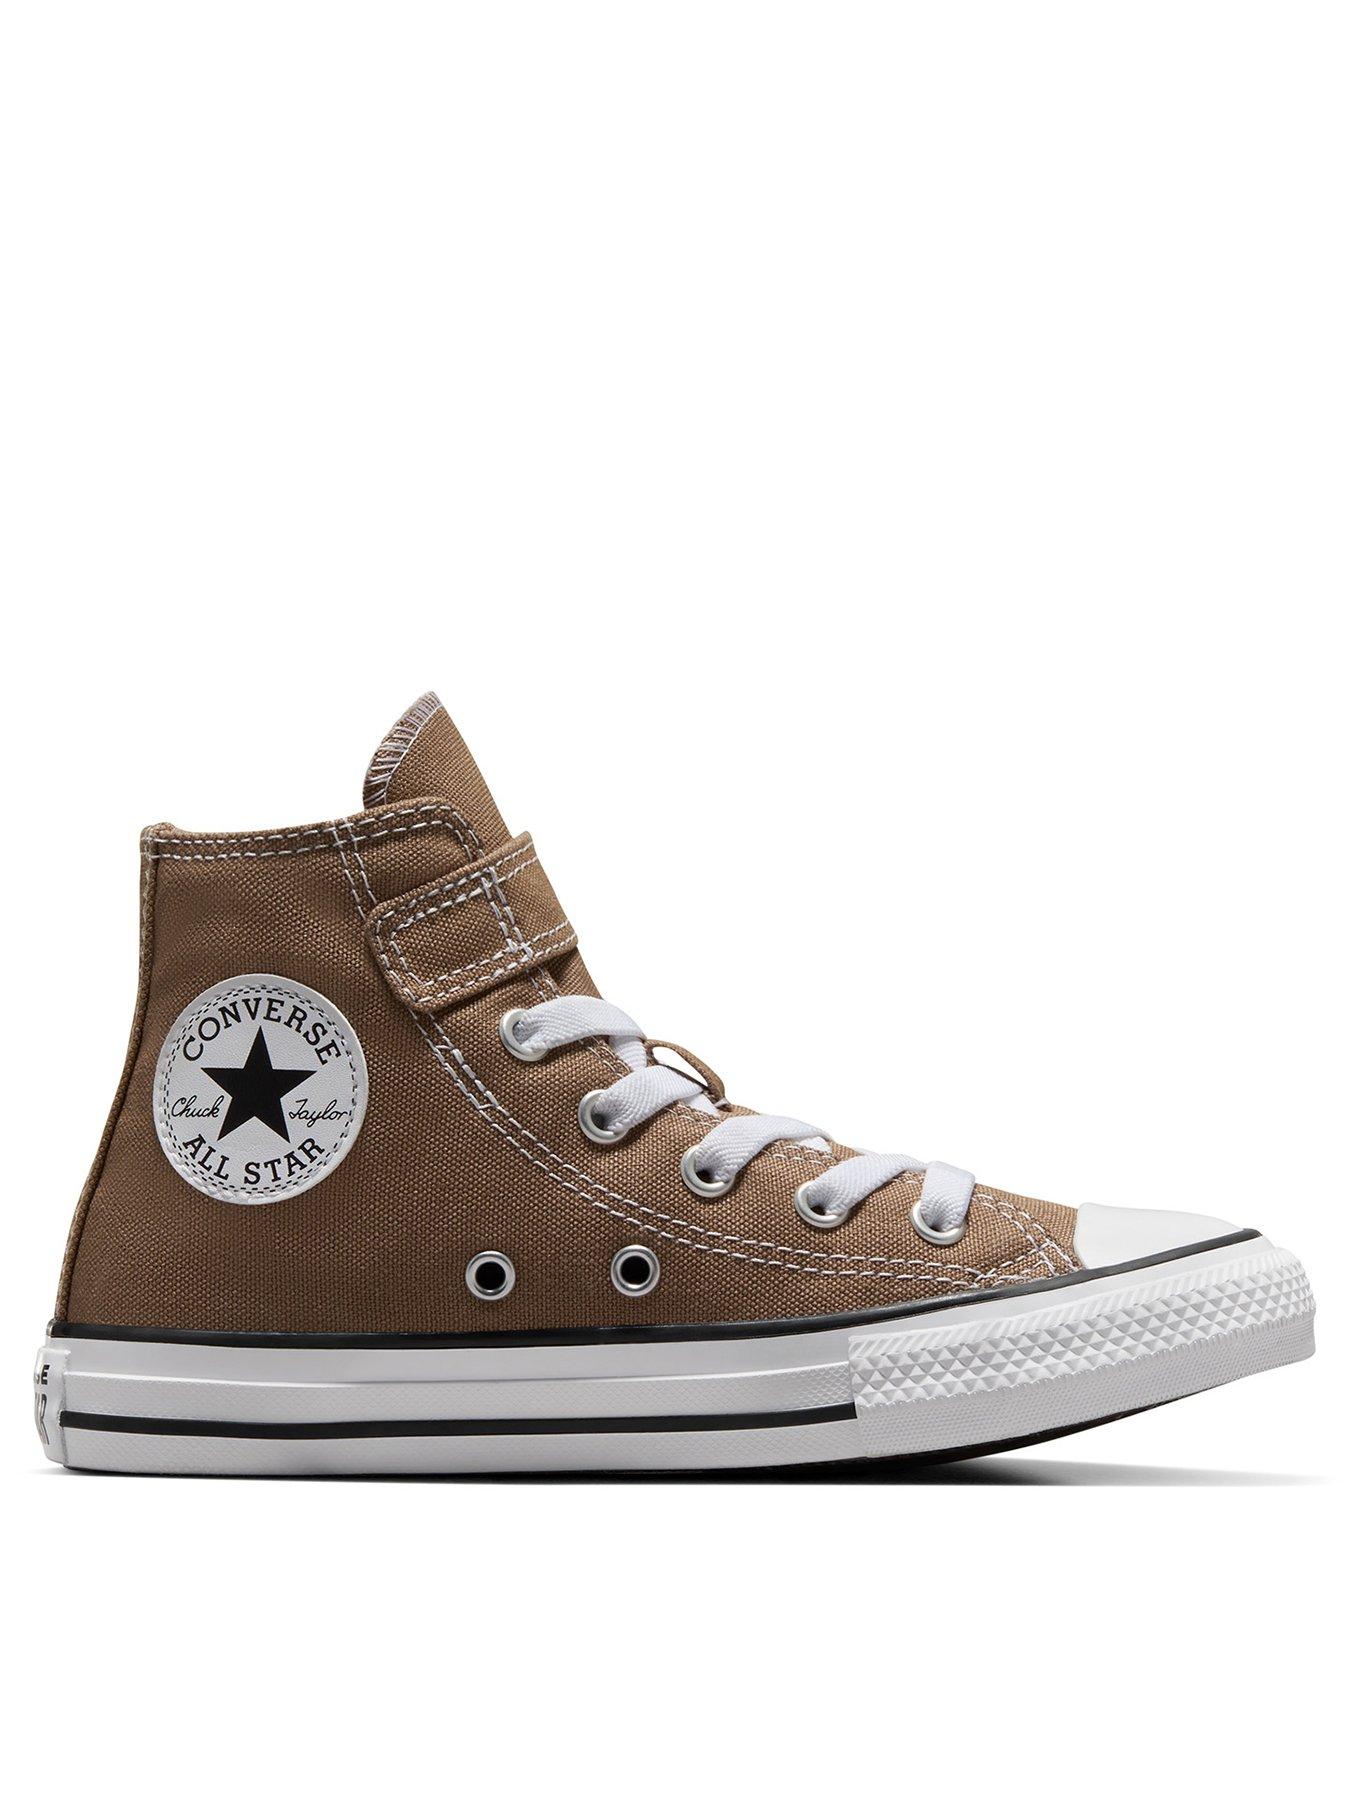 Converse Kids Boys 1V Hi Top Trainers - Brown, Brown, Size 13.5 Younger